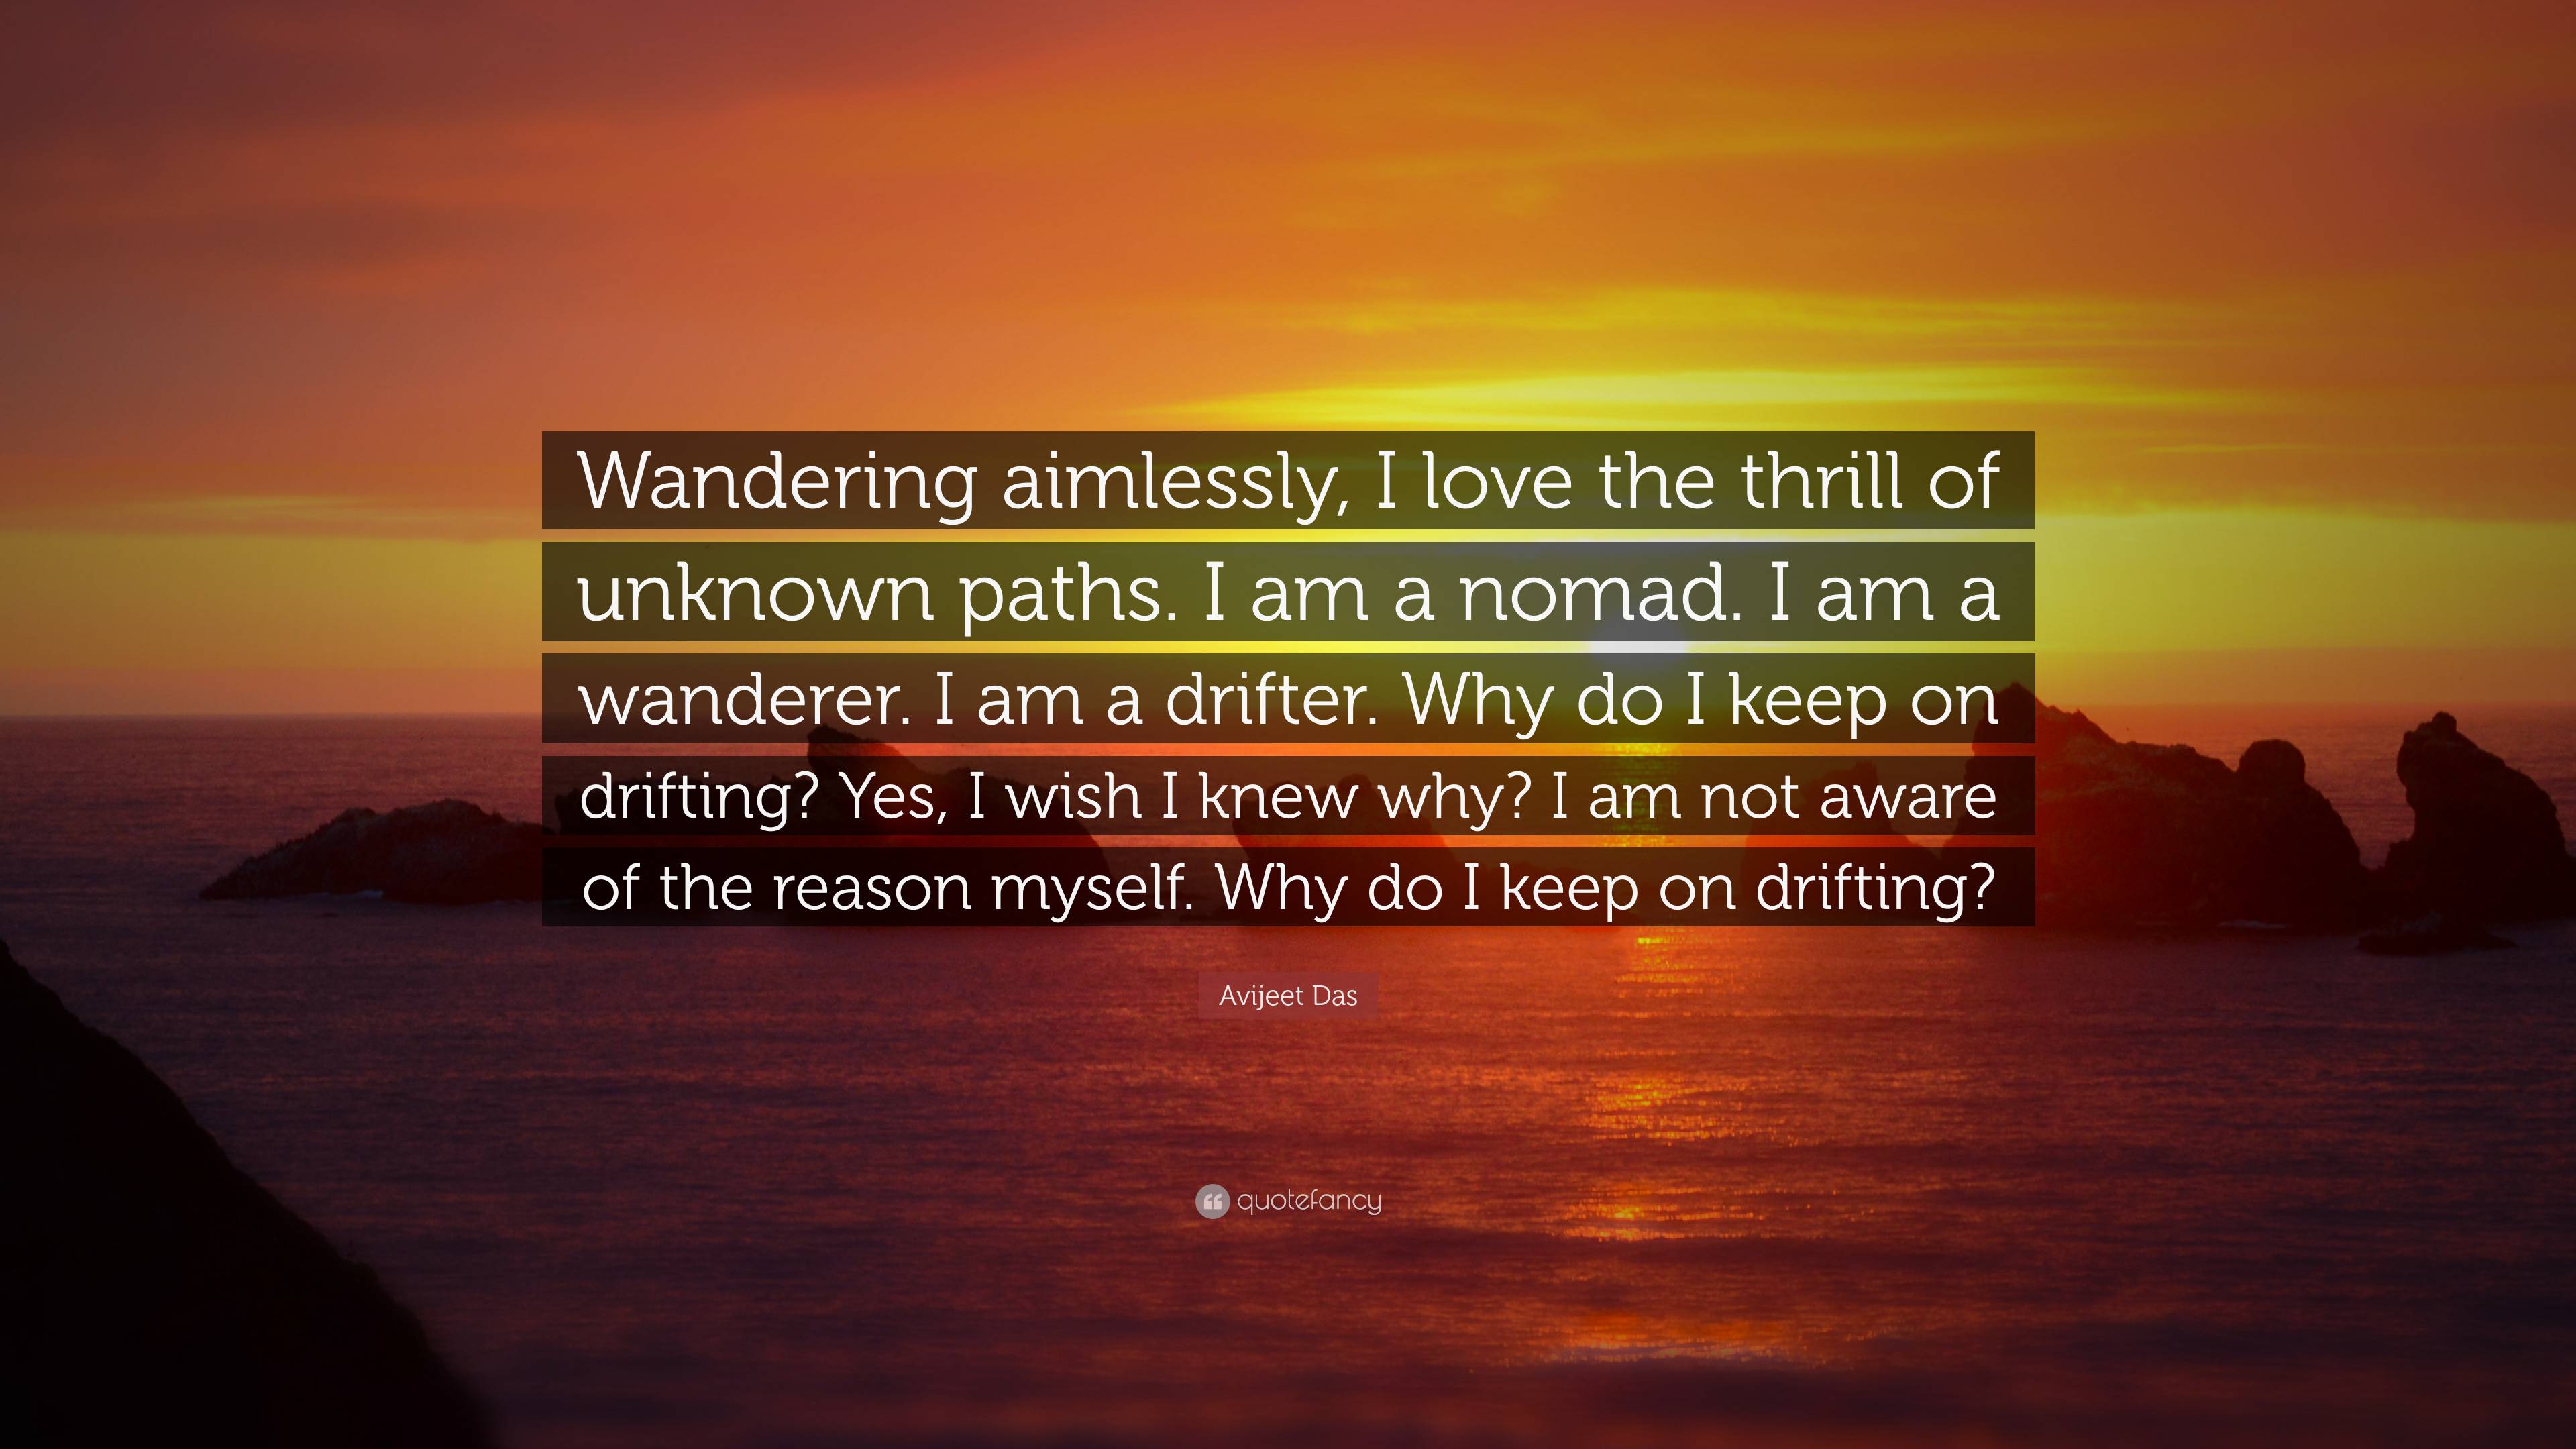 wandering aimlessly through life